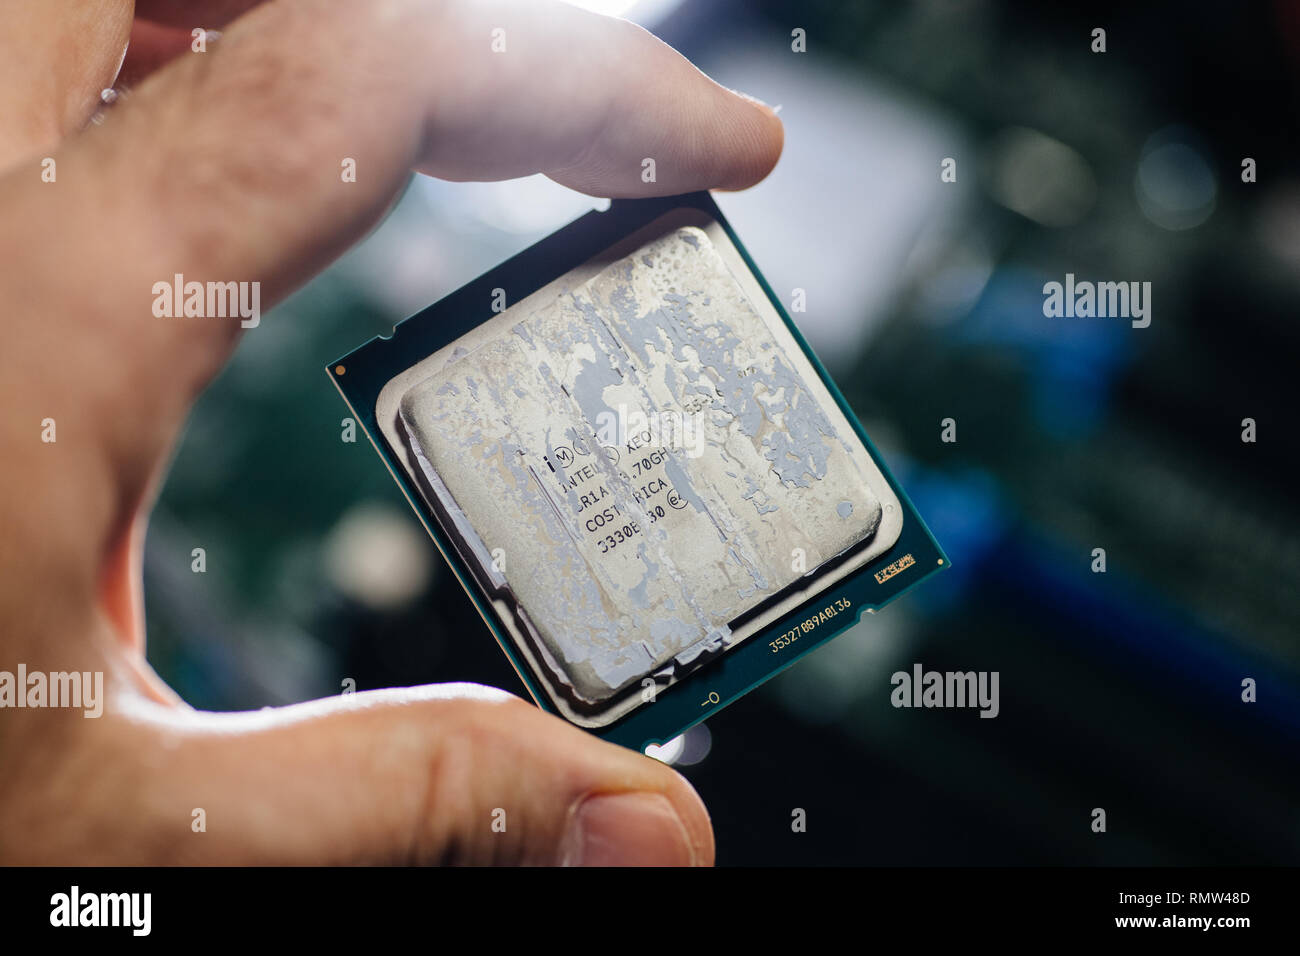 London, United Kingdom - Feb 5, 2019: Man hand IT engineer holding against technological motherboard background new Intel Xeon professional CPU processor Broadwell FCLGA2011-3 Stock Photo